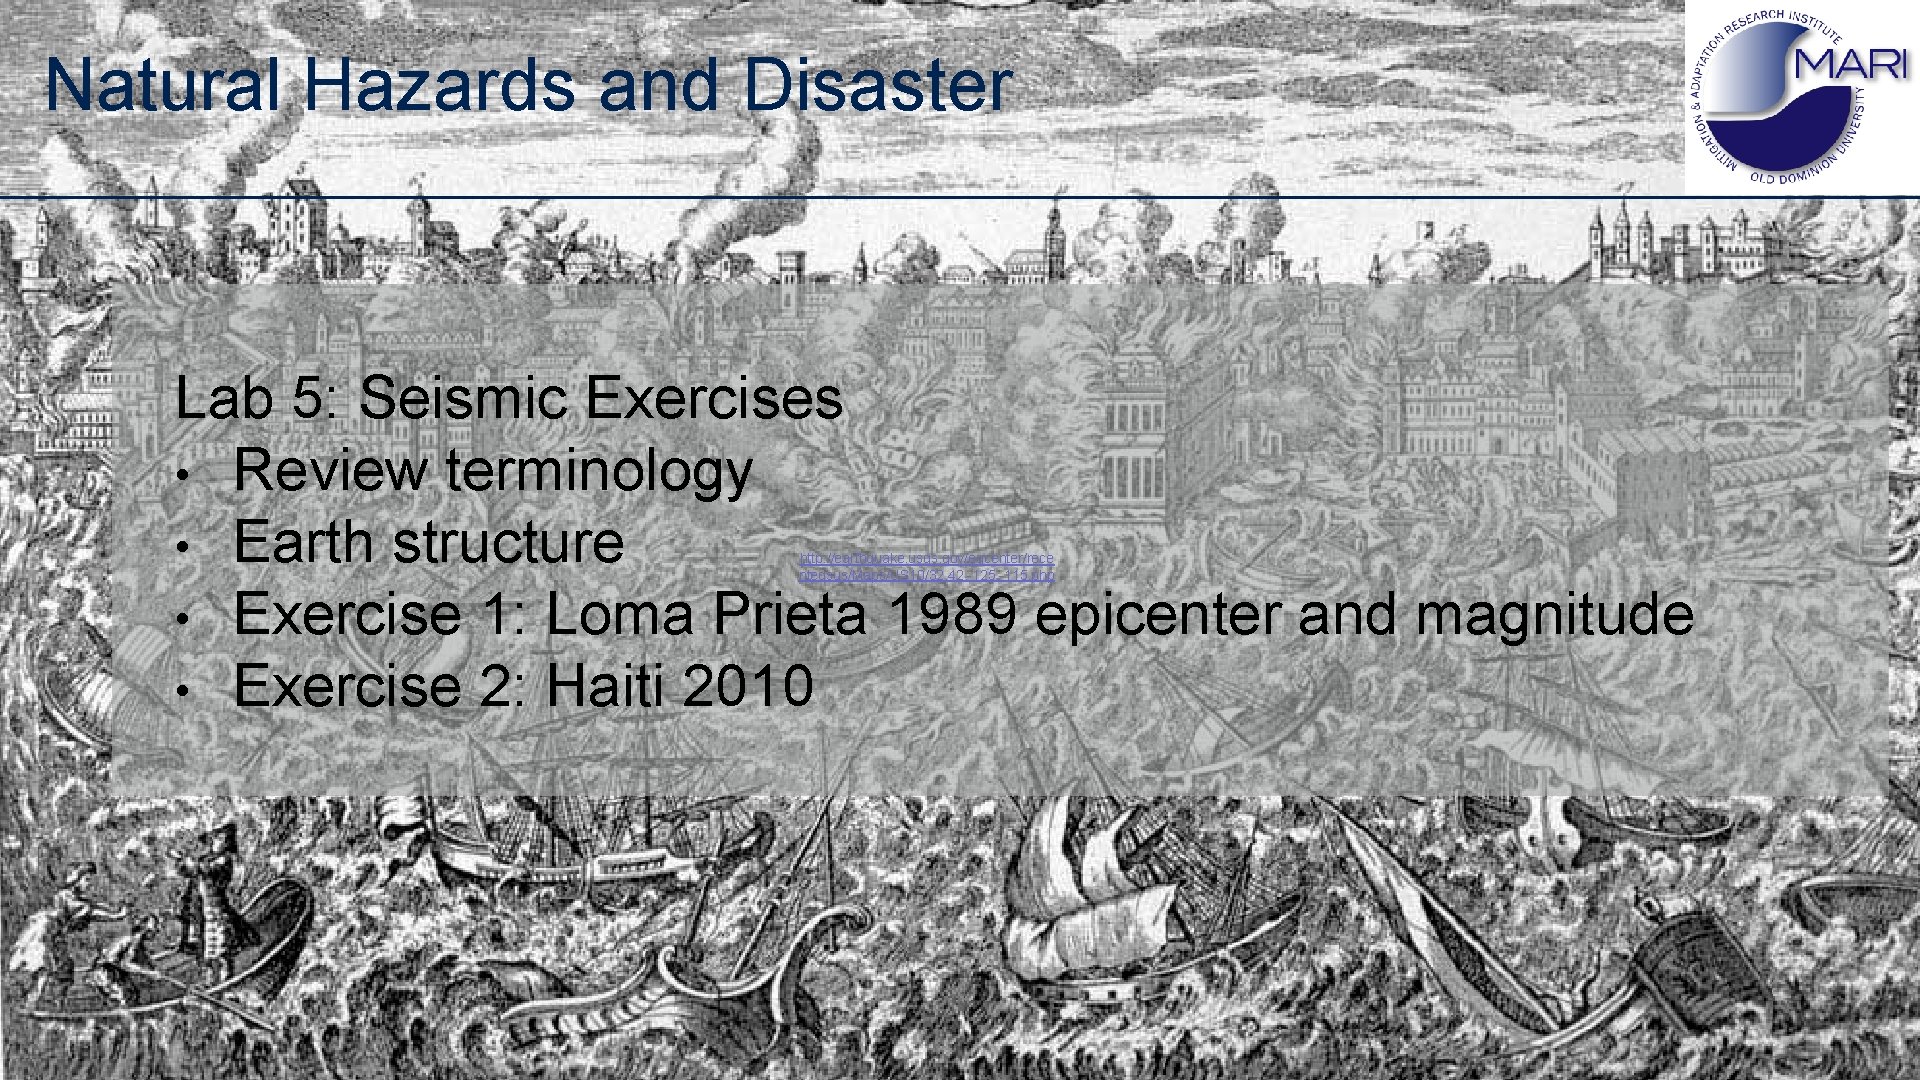 Natural Hazards and Disaster Lab 5: Seismic Exercises • Review terminology • Earth structure